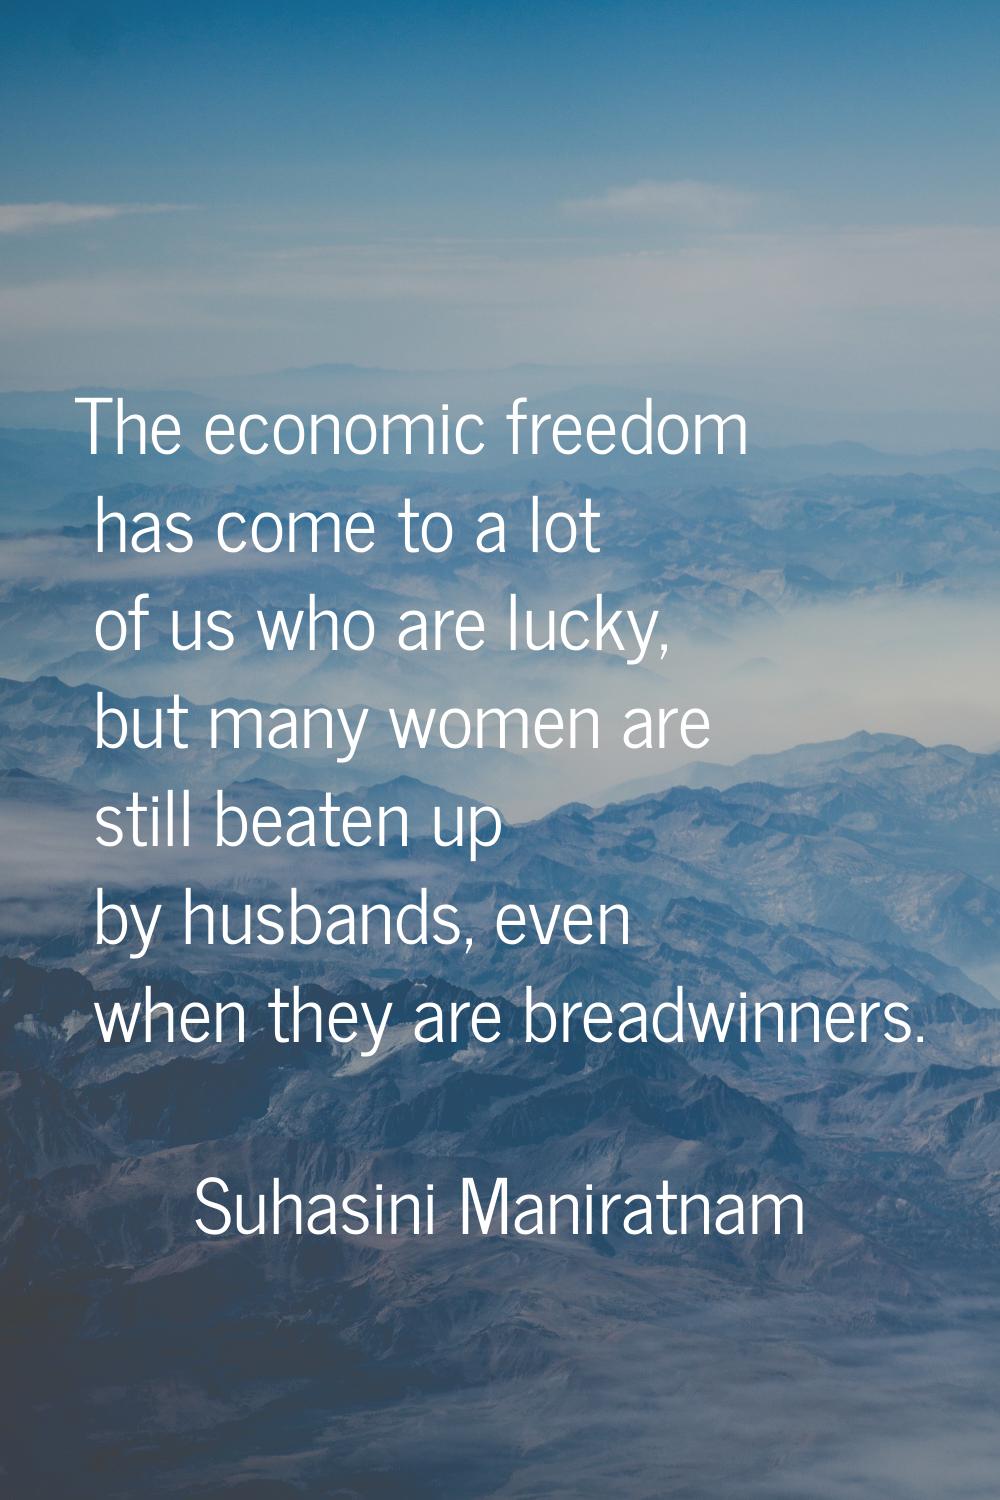 The economic freedom has come to a lot of us who are lucky, but many women are still beaten up by h